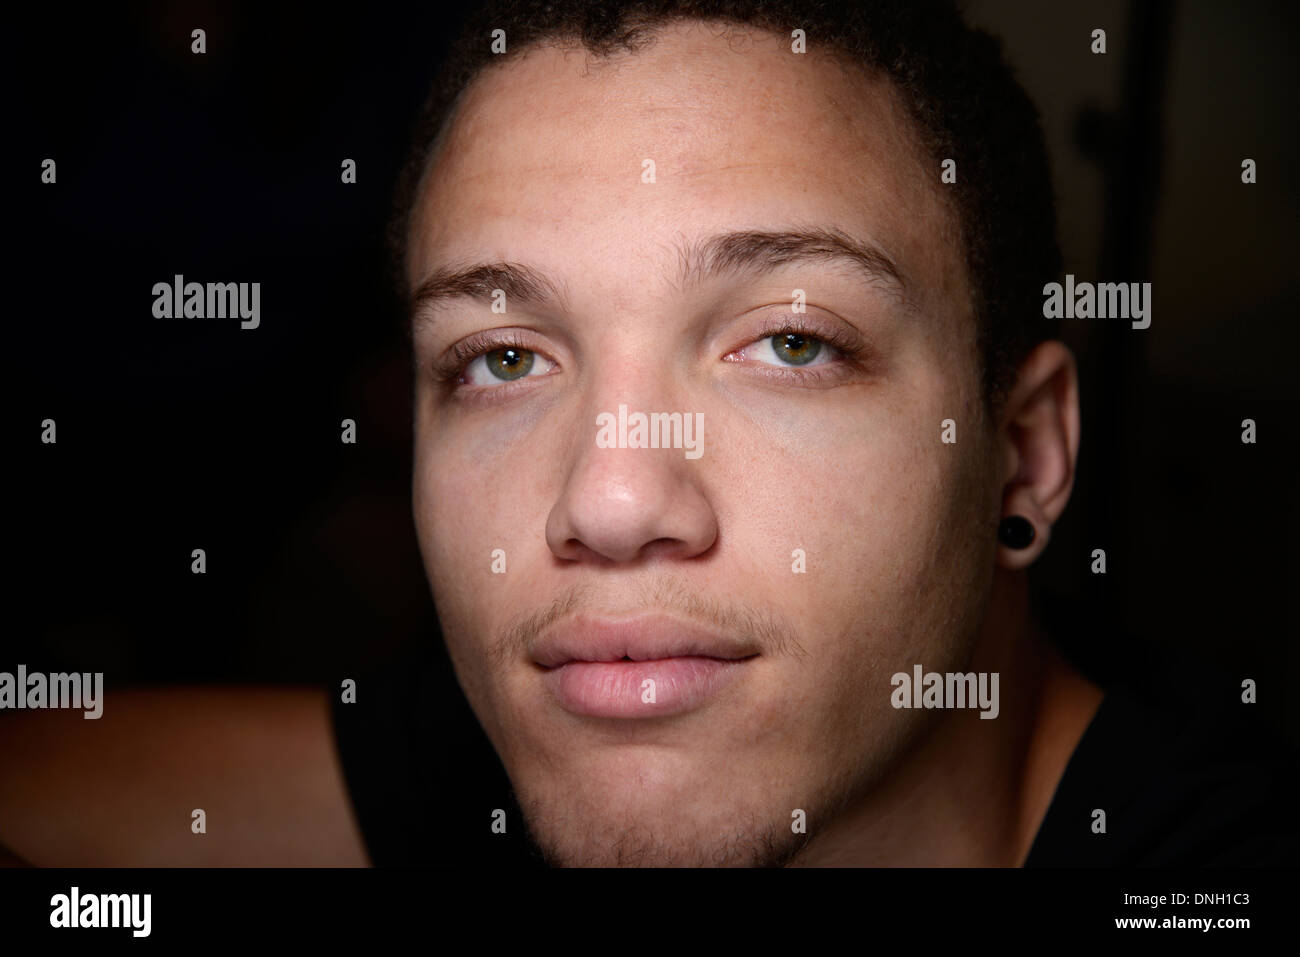 A male teenager and recent graduate. Stock Photo